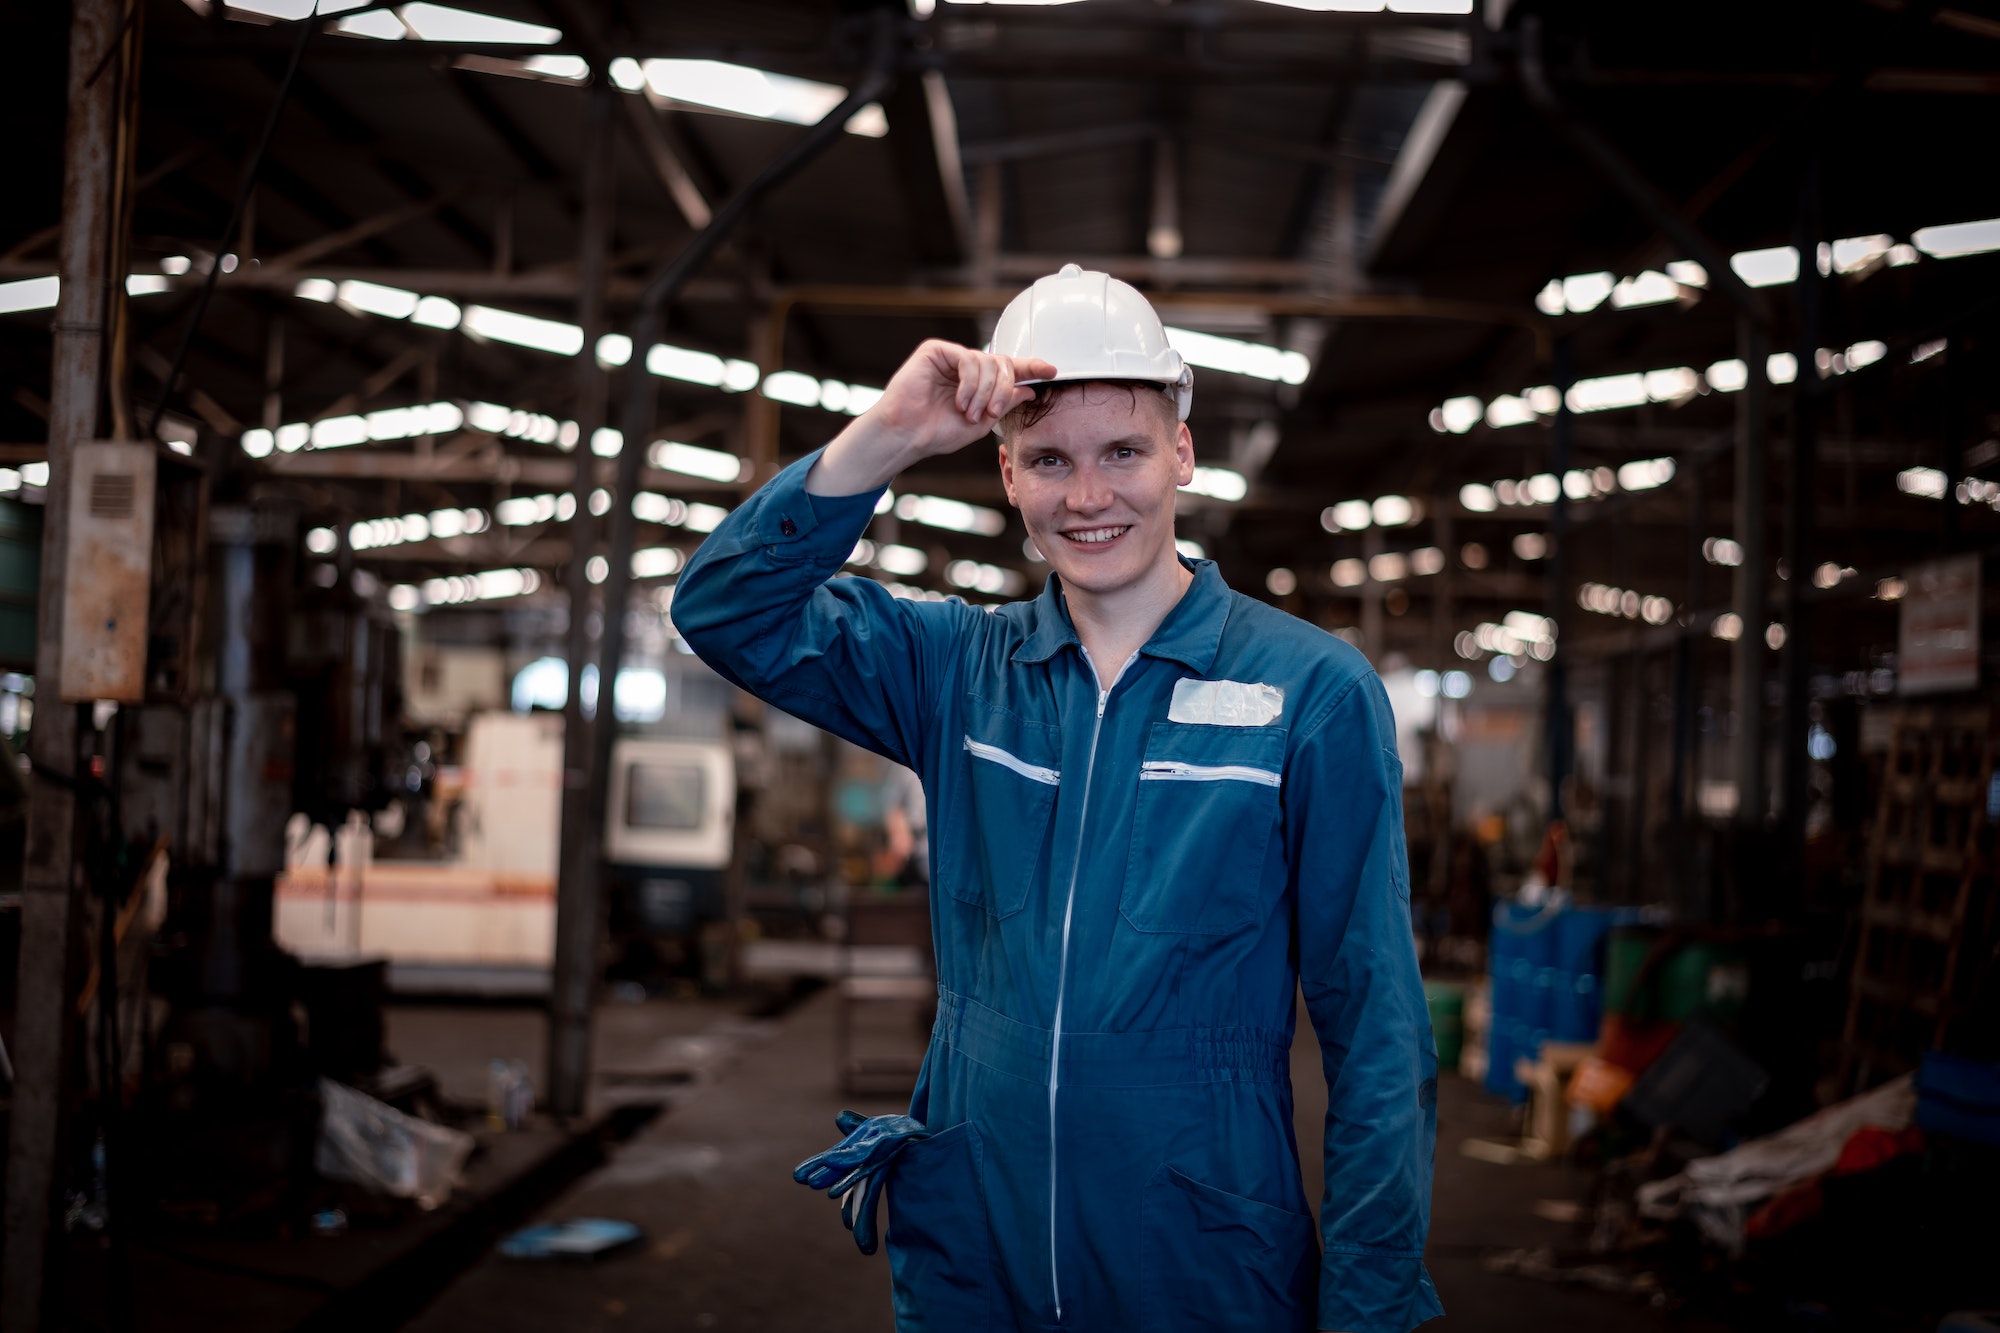 Portrait engineer worker industry wearing safety uniform pose standing at factory workplace with ind